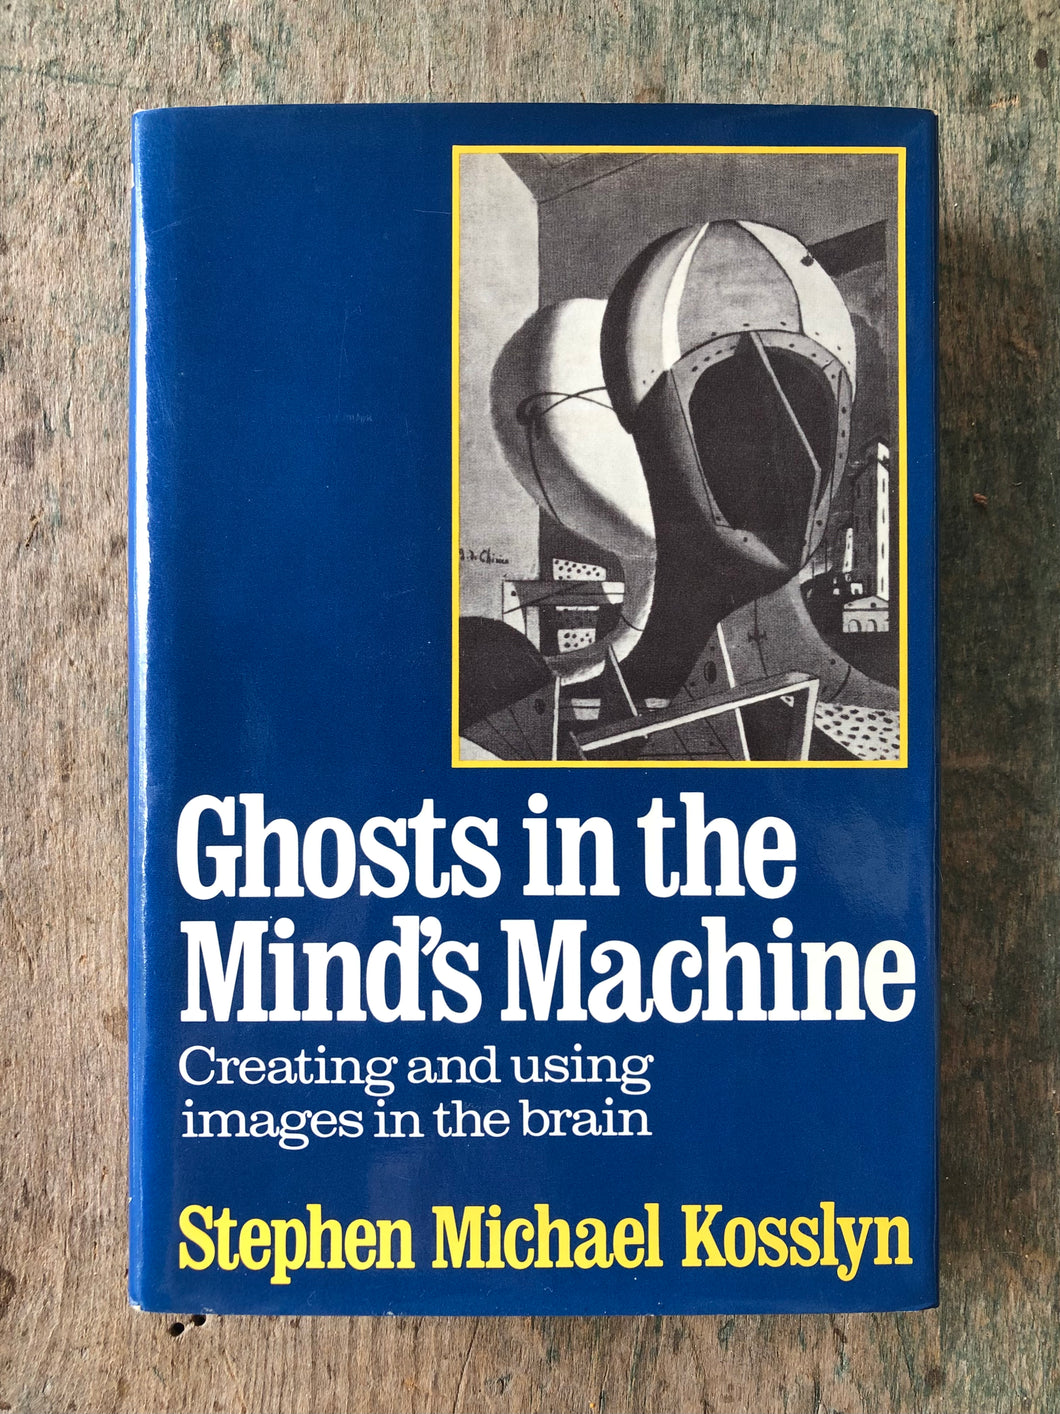 Ghosts in the Minds Machine: Creating and Using Images in the Brain by Stephen Michael Kosslyn